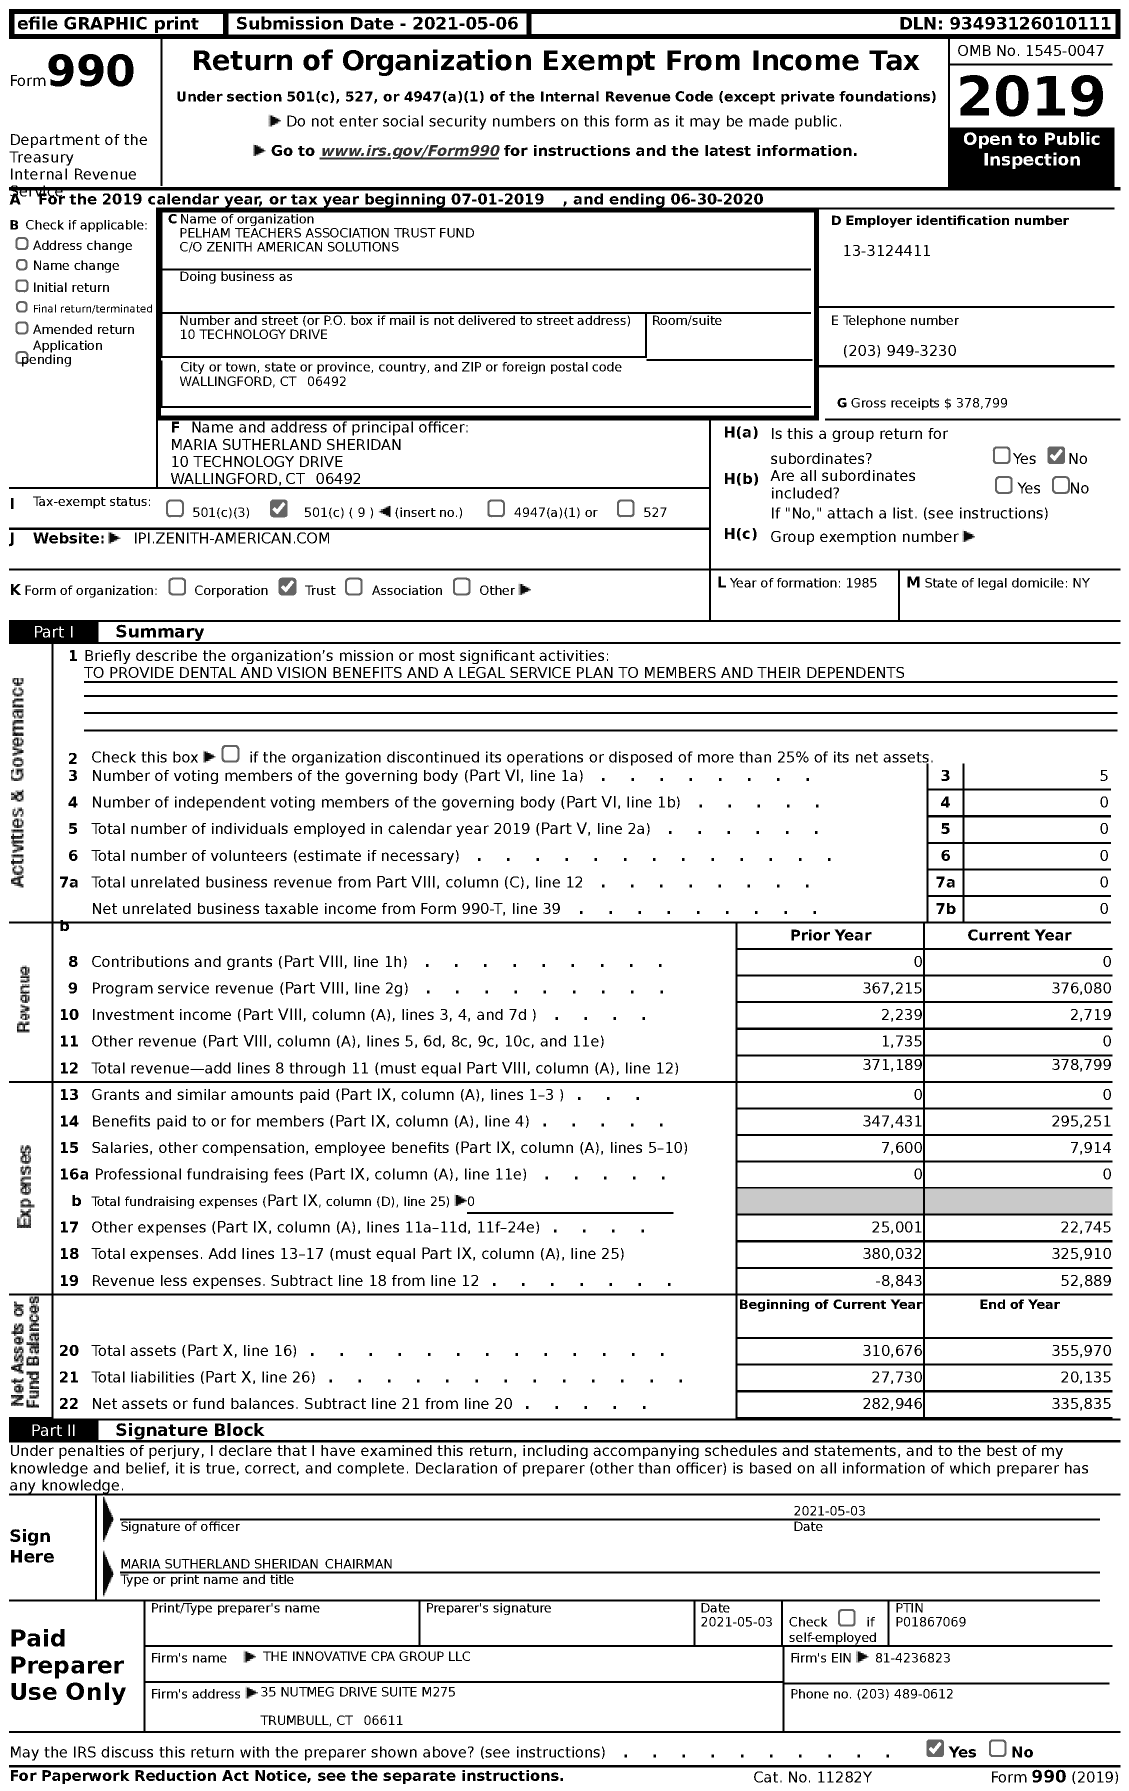 Image of first page of 2019 Form 990 for Pelham Teachers Association Trust Fund